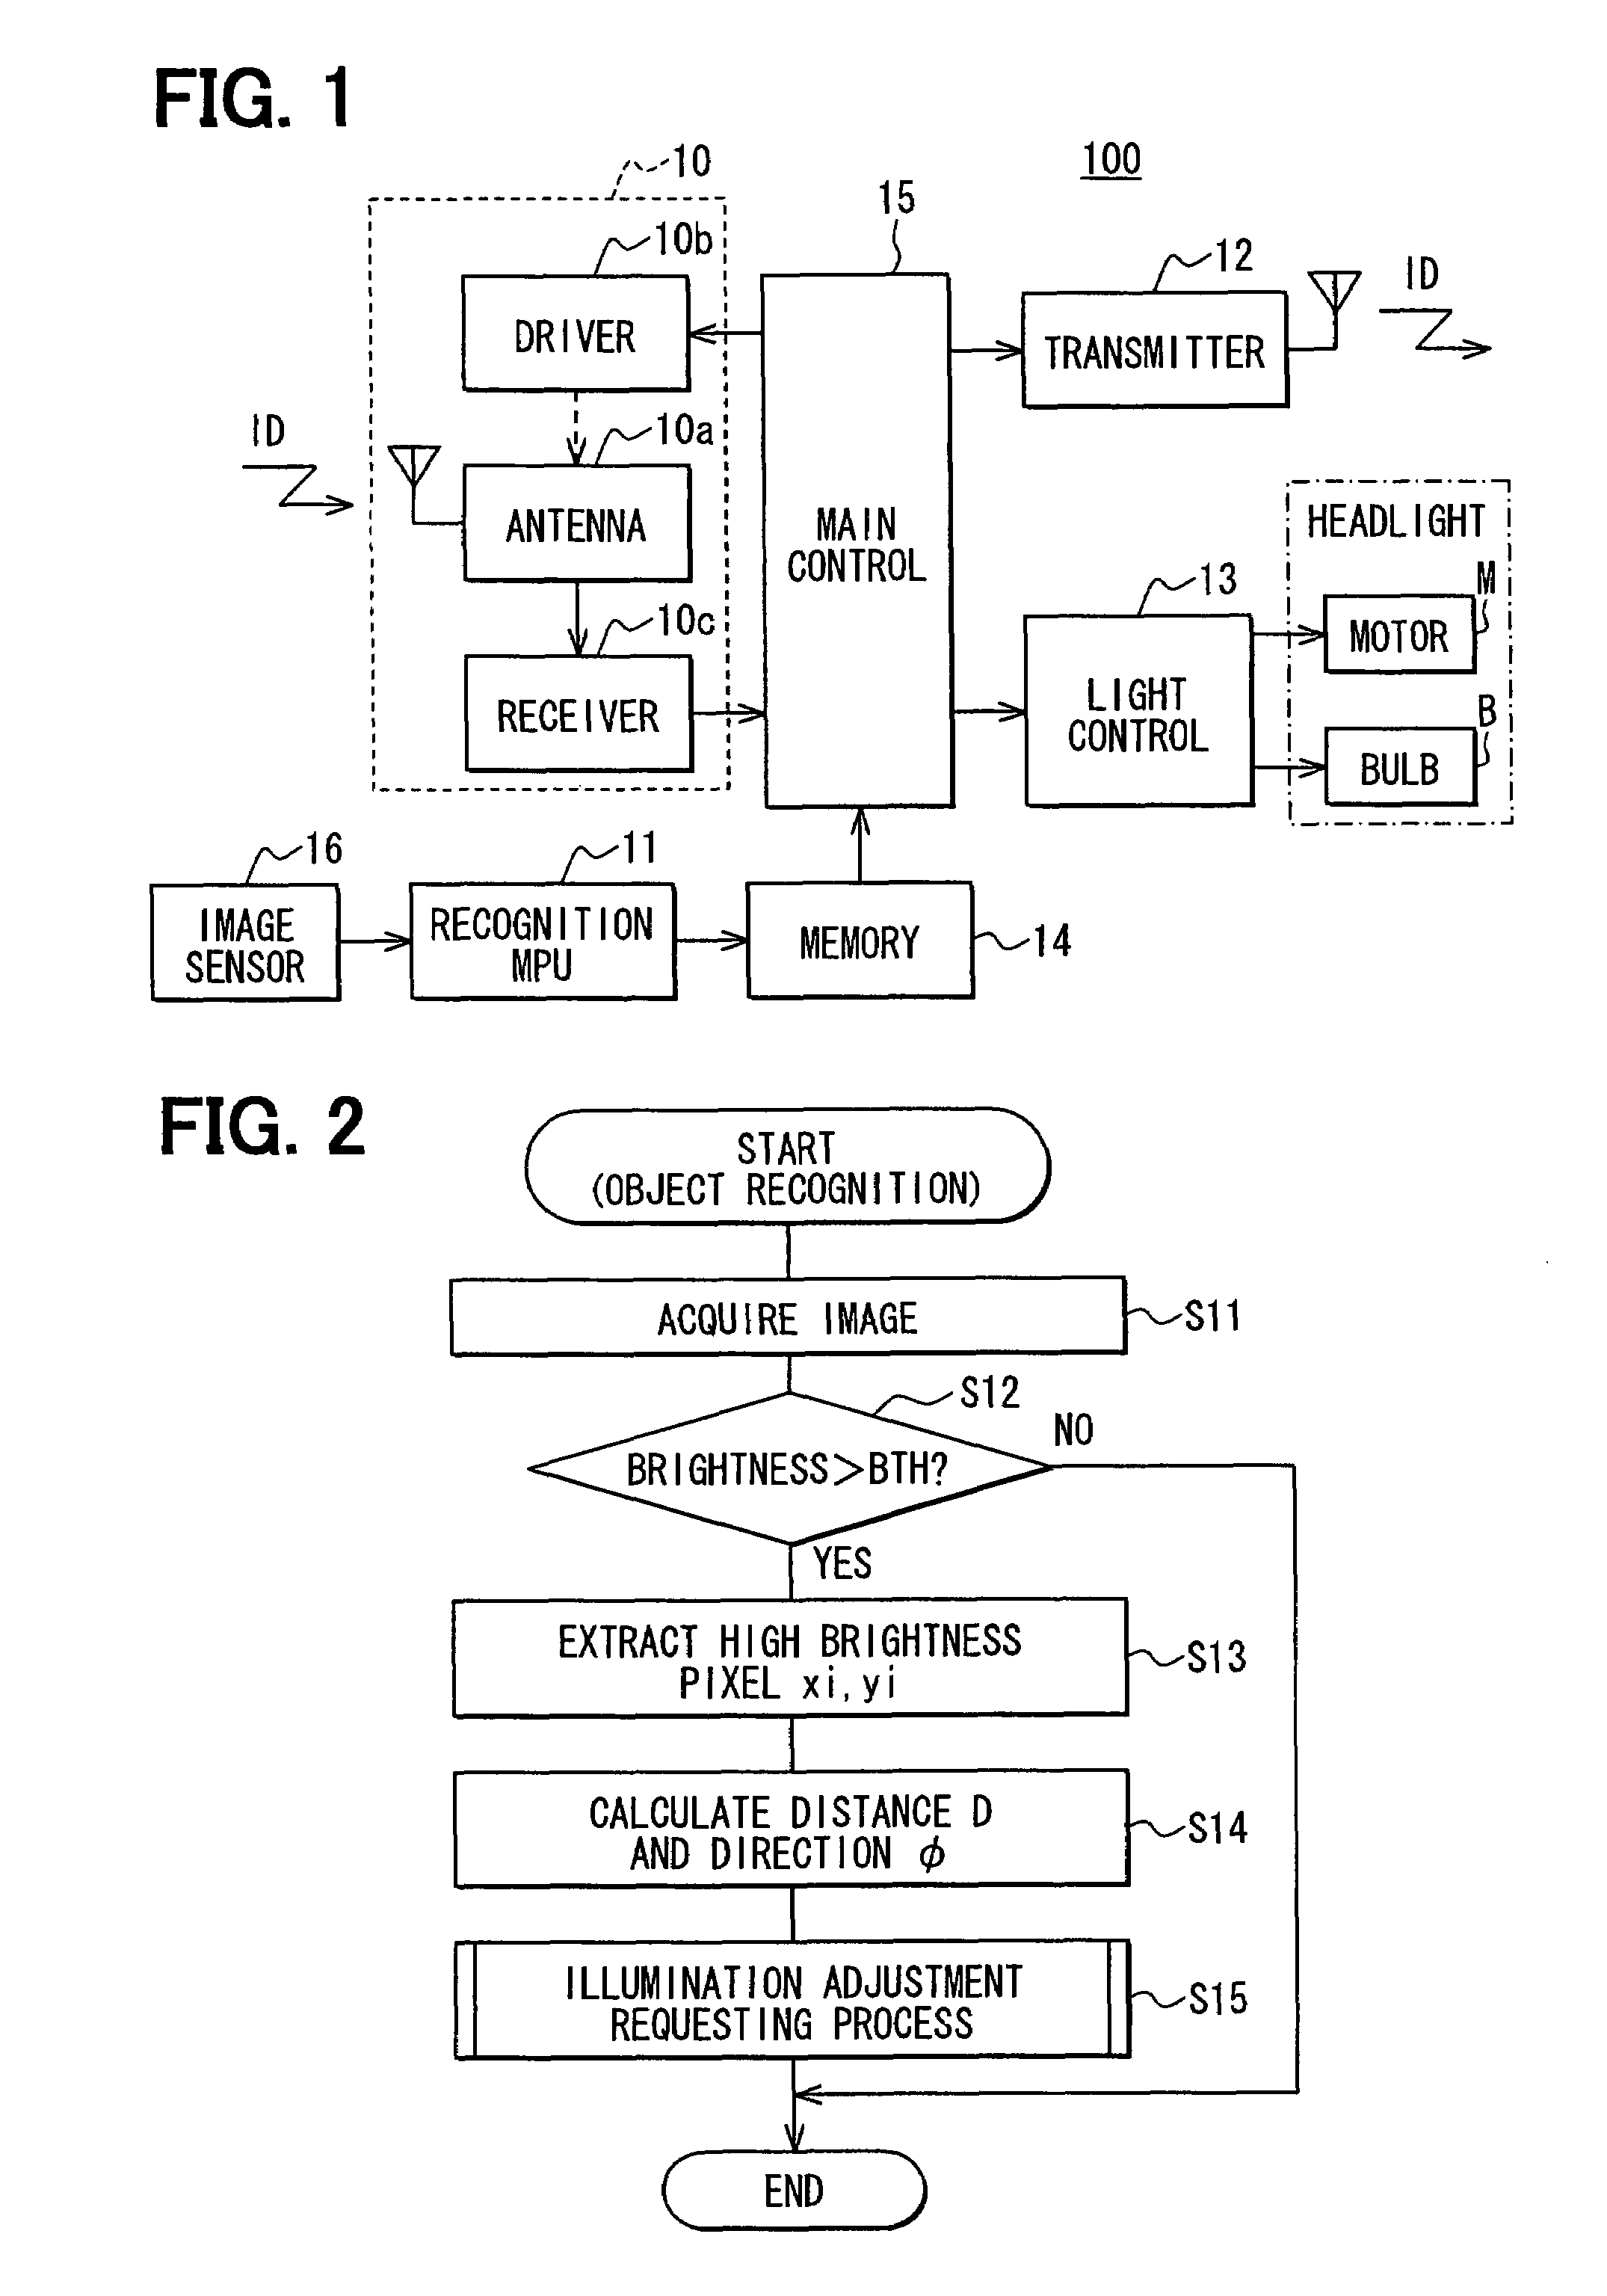 Vehicle light control apparatus, system and method